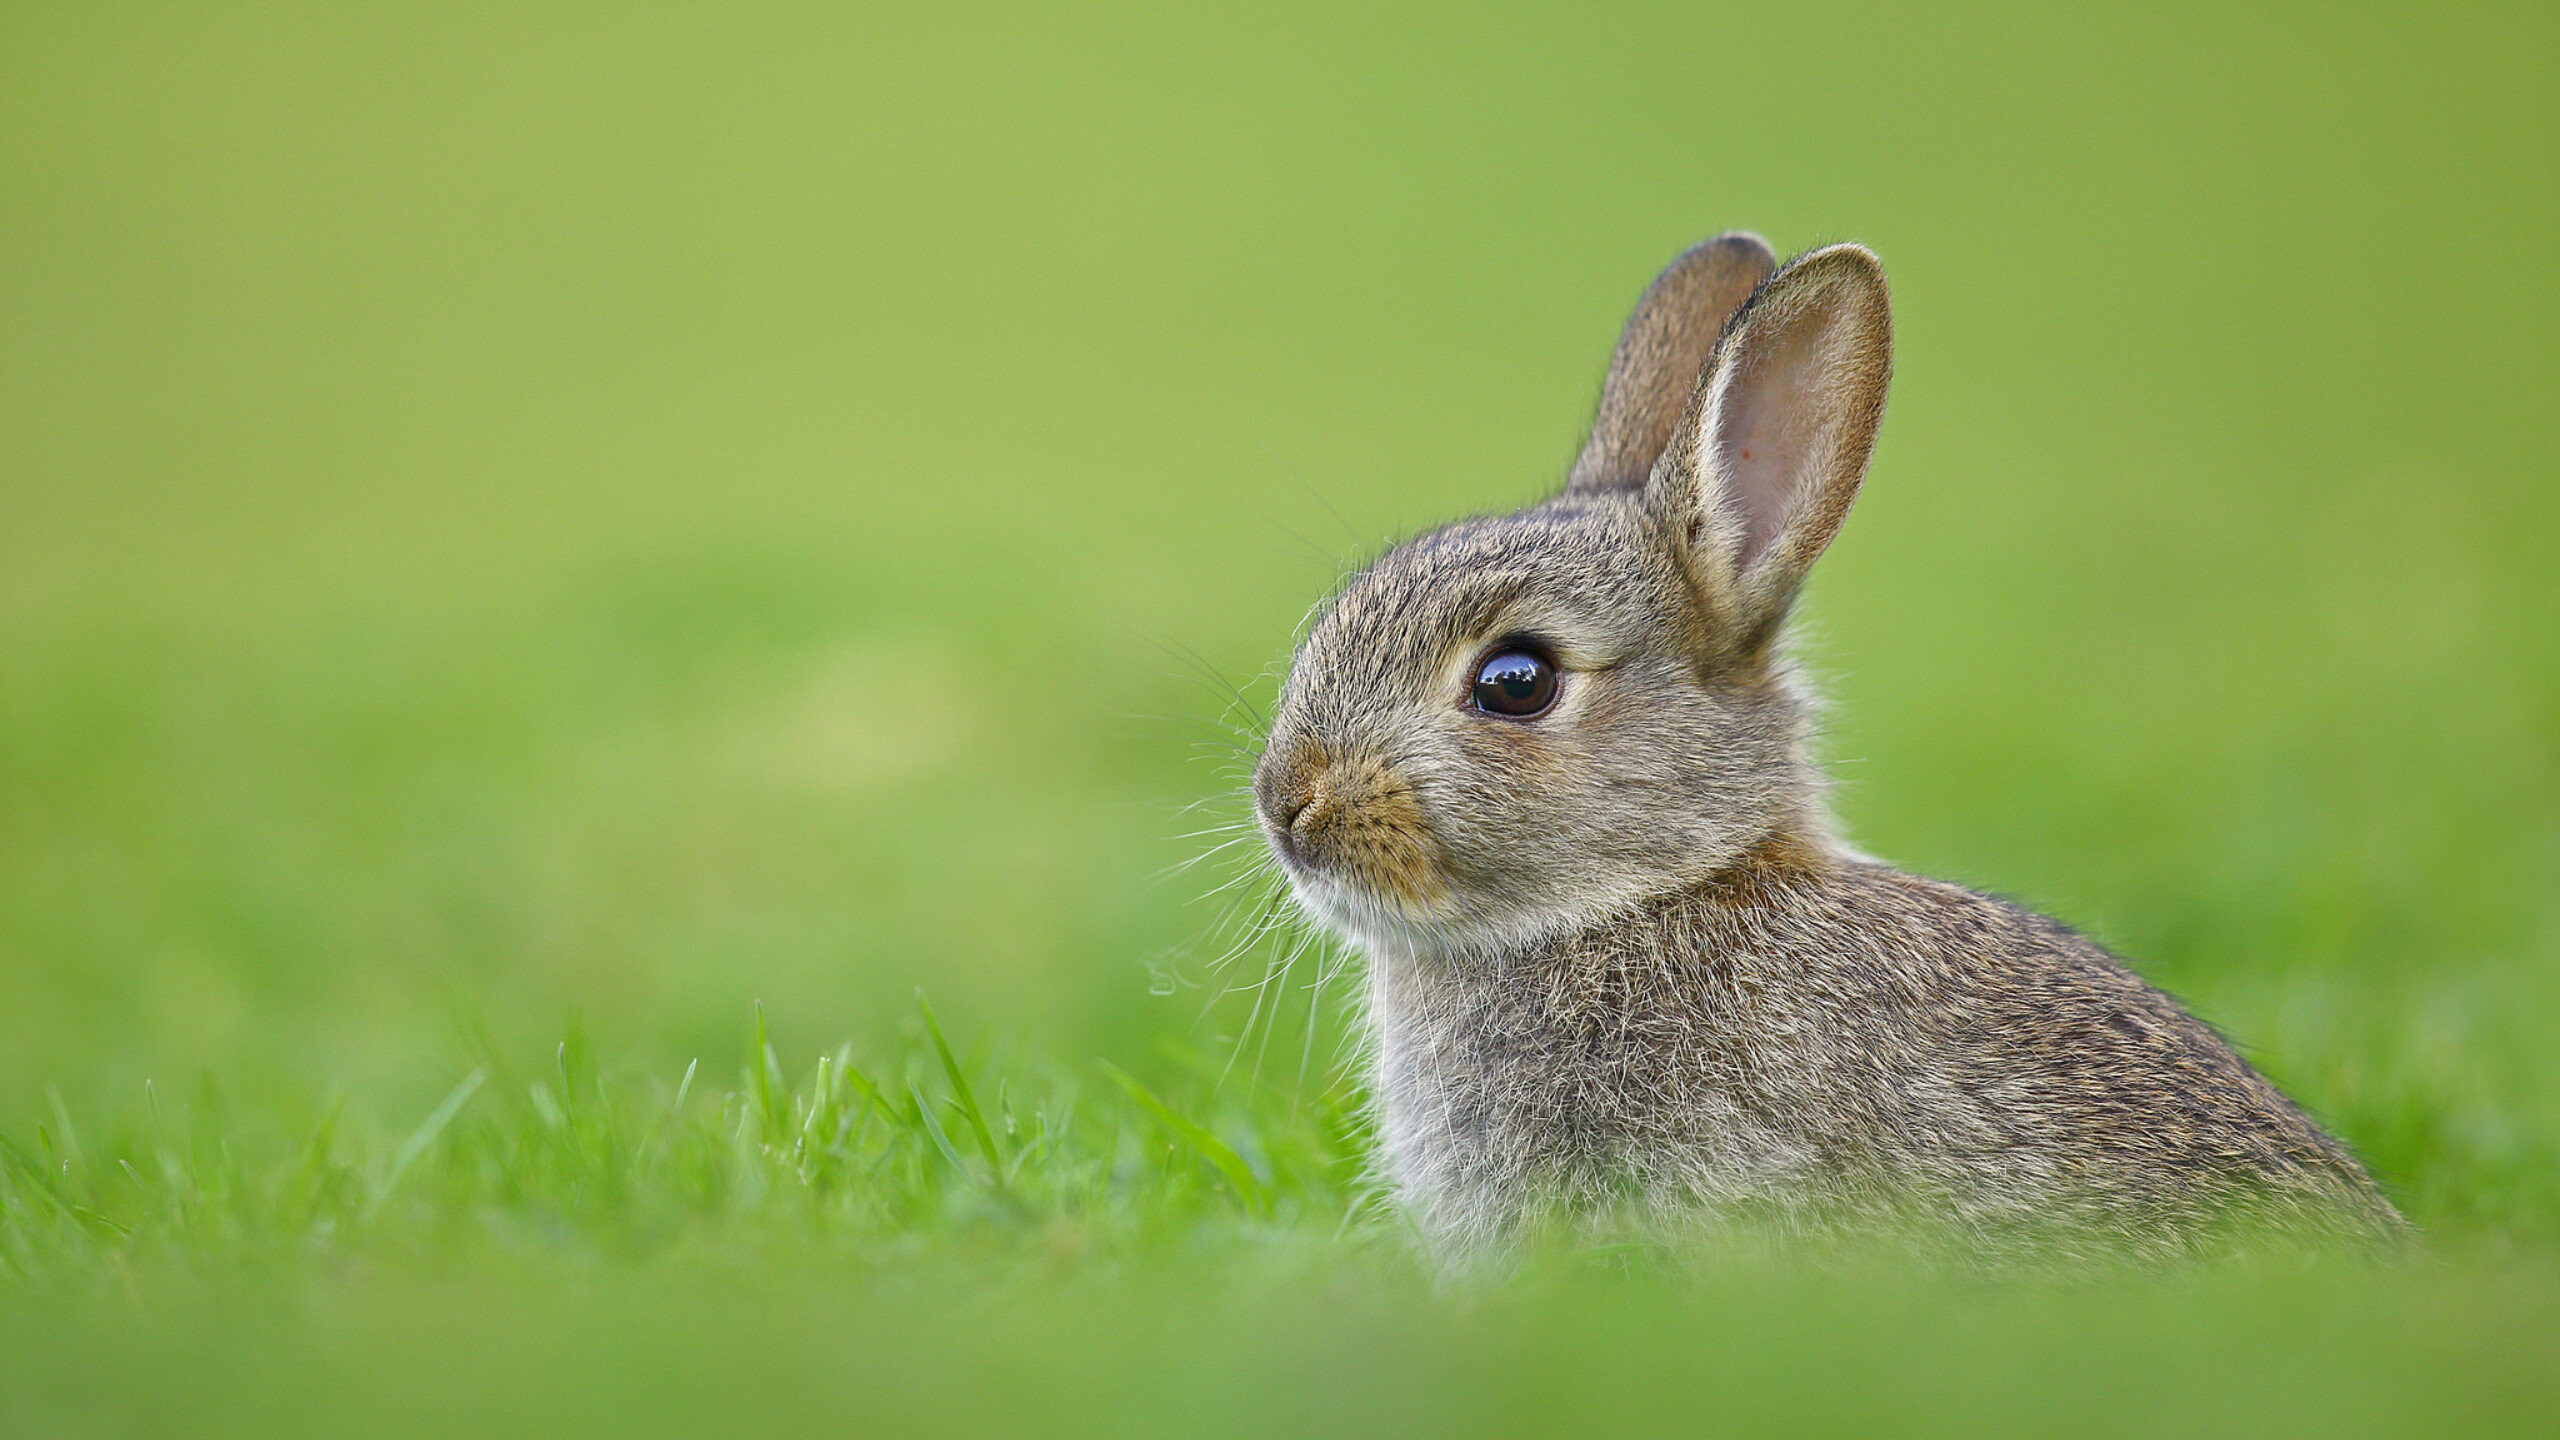 Rabbit: Small mammals which are found in several parts of the world including Europe. 2560x1440 HD Wallpaper.